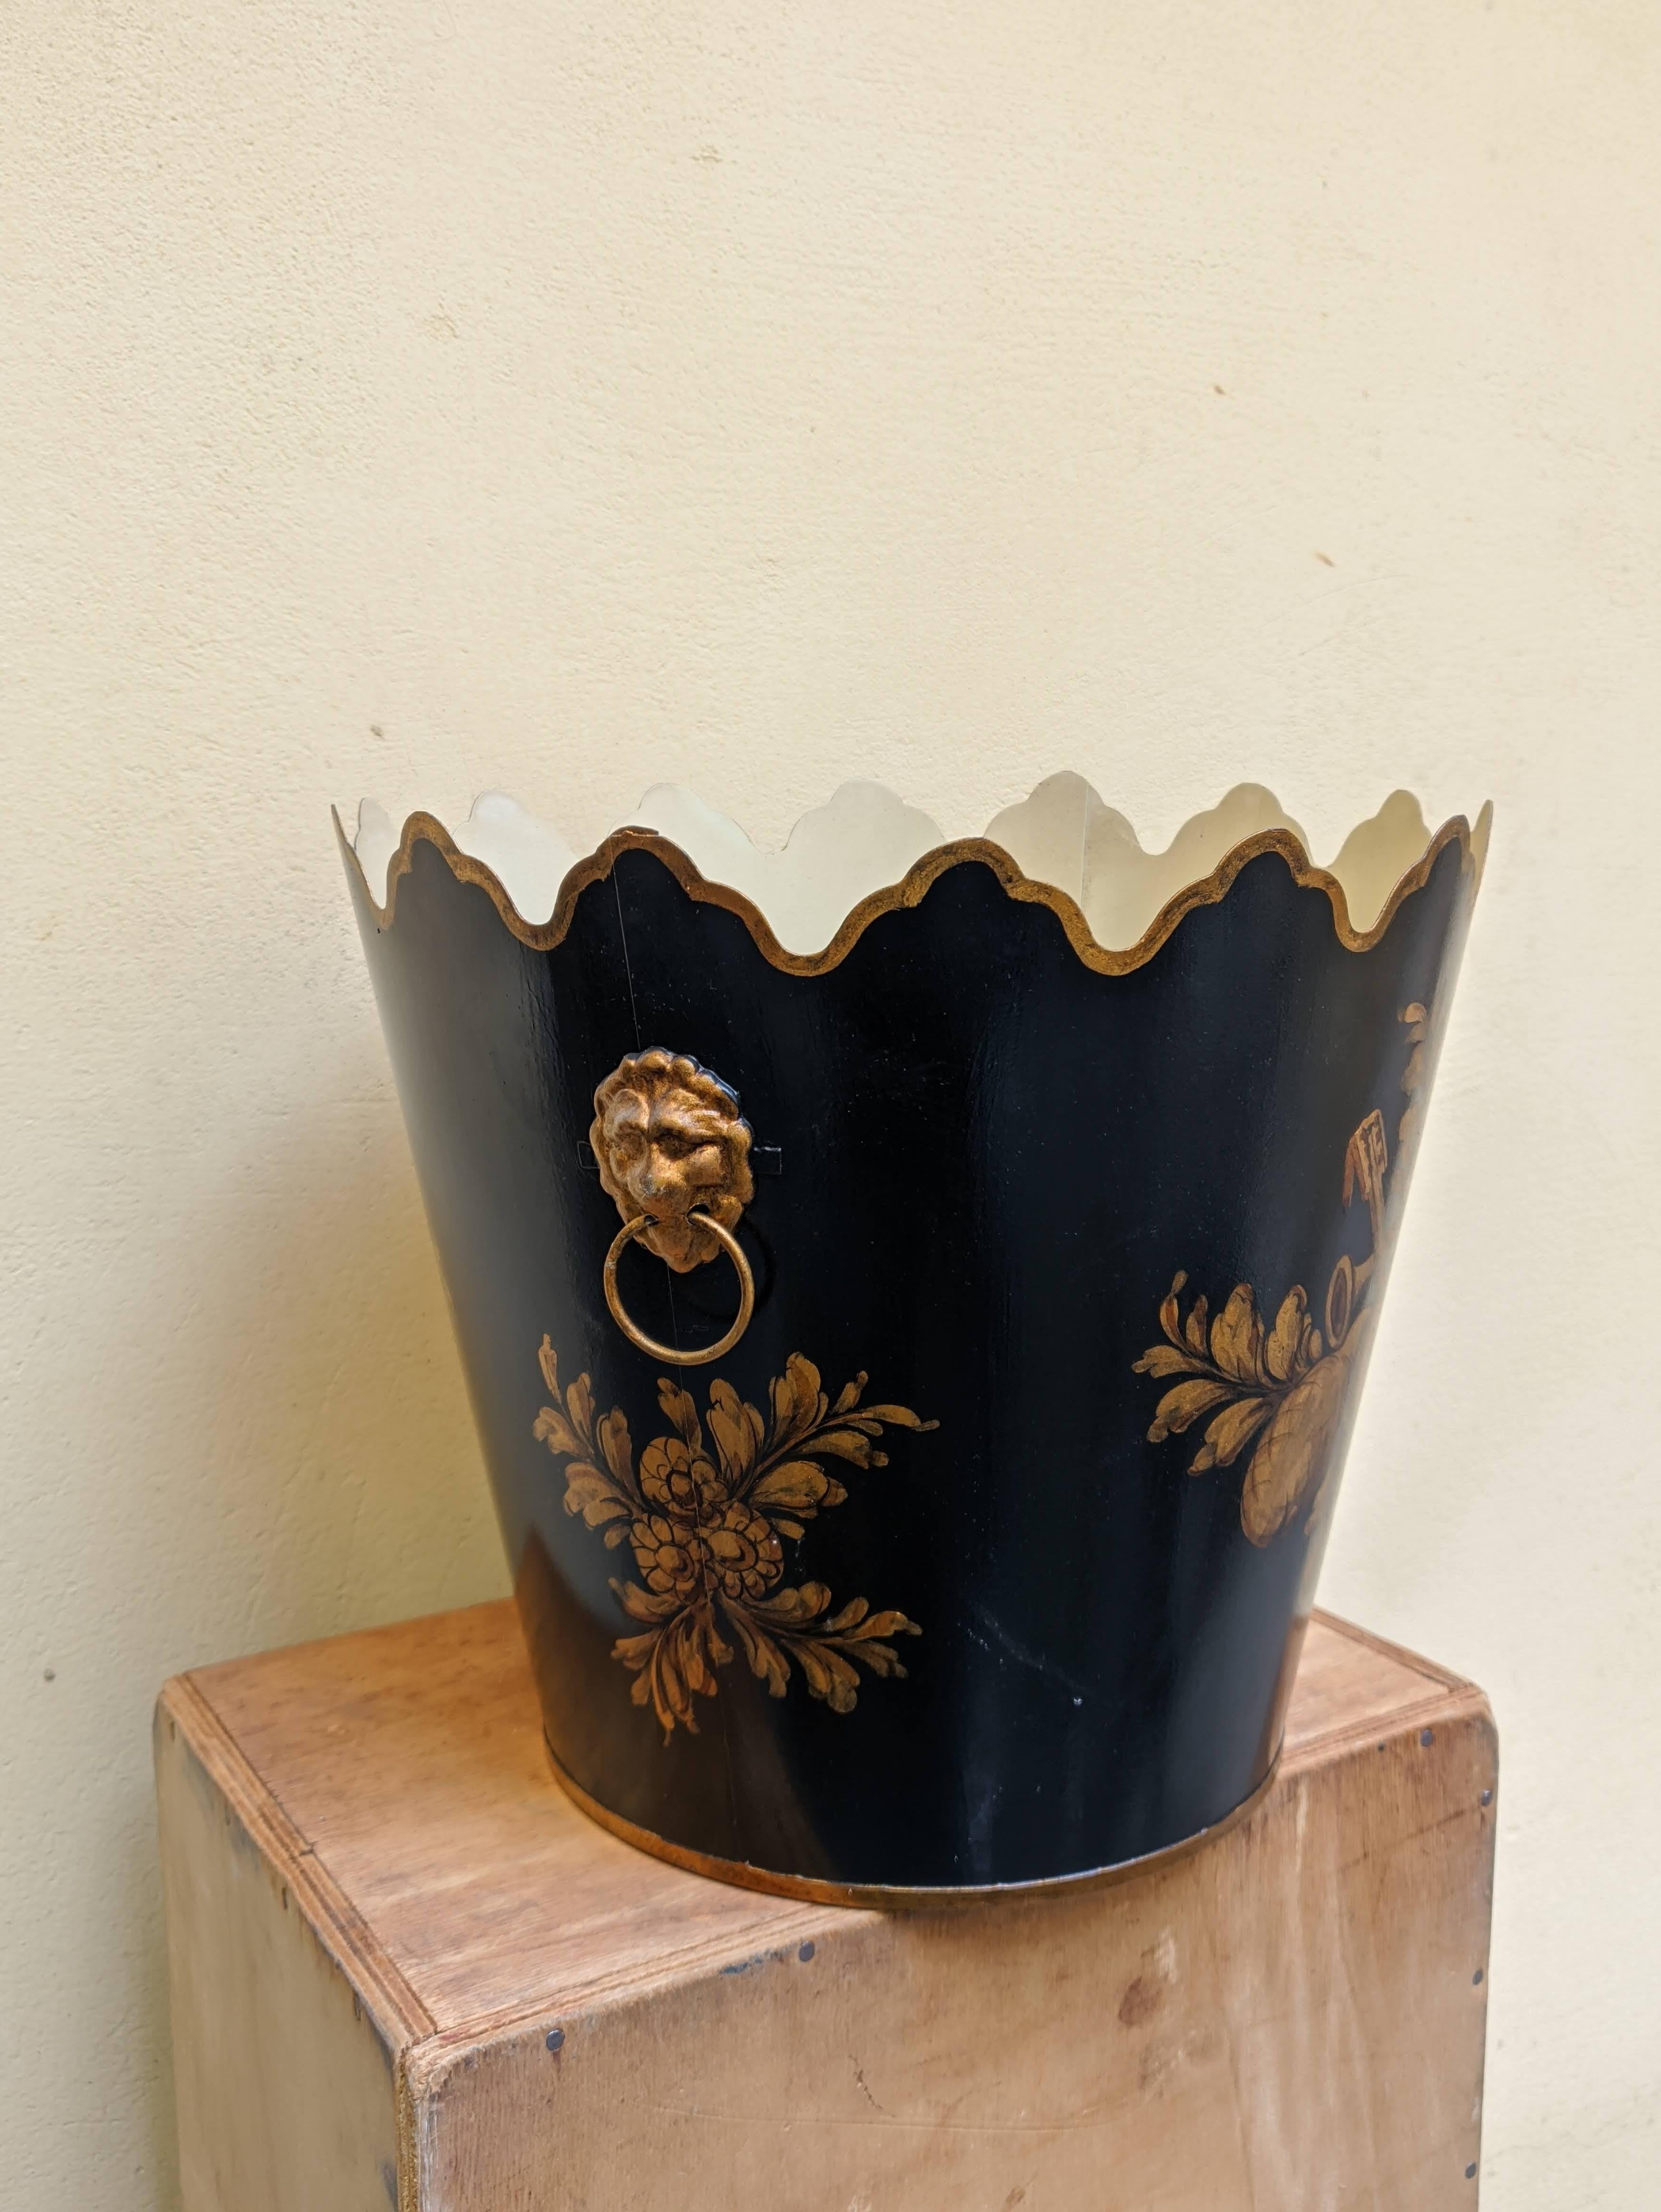 Limited production of French tole cachepot in chinoiserie style. Available with different decoration and colors. Conic shaped with scalloped top.